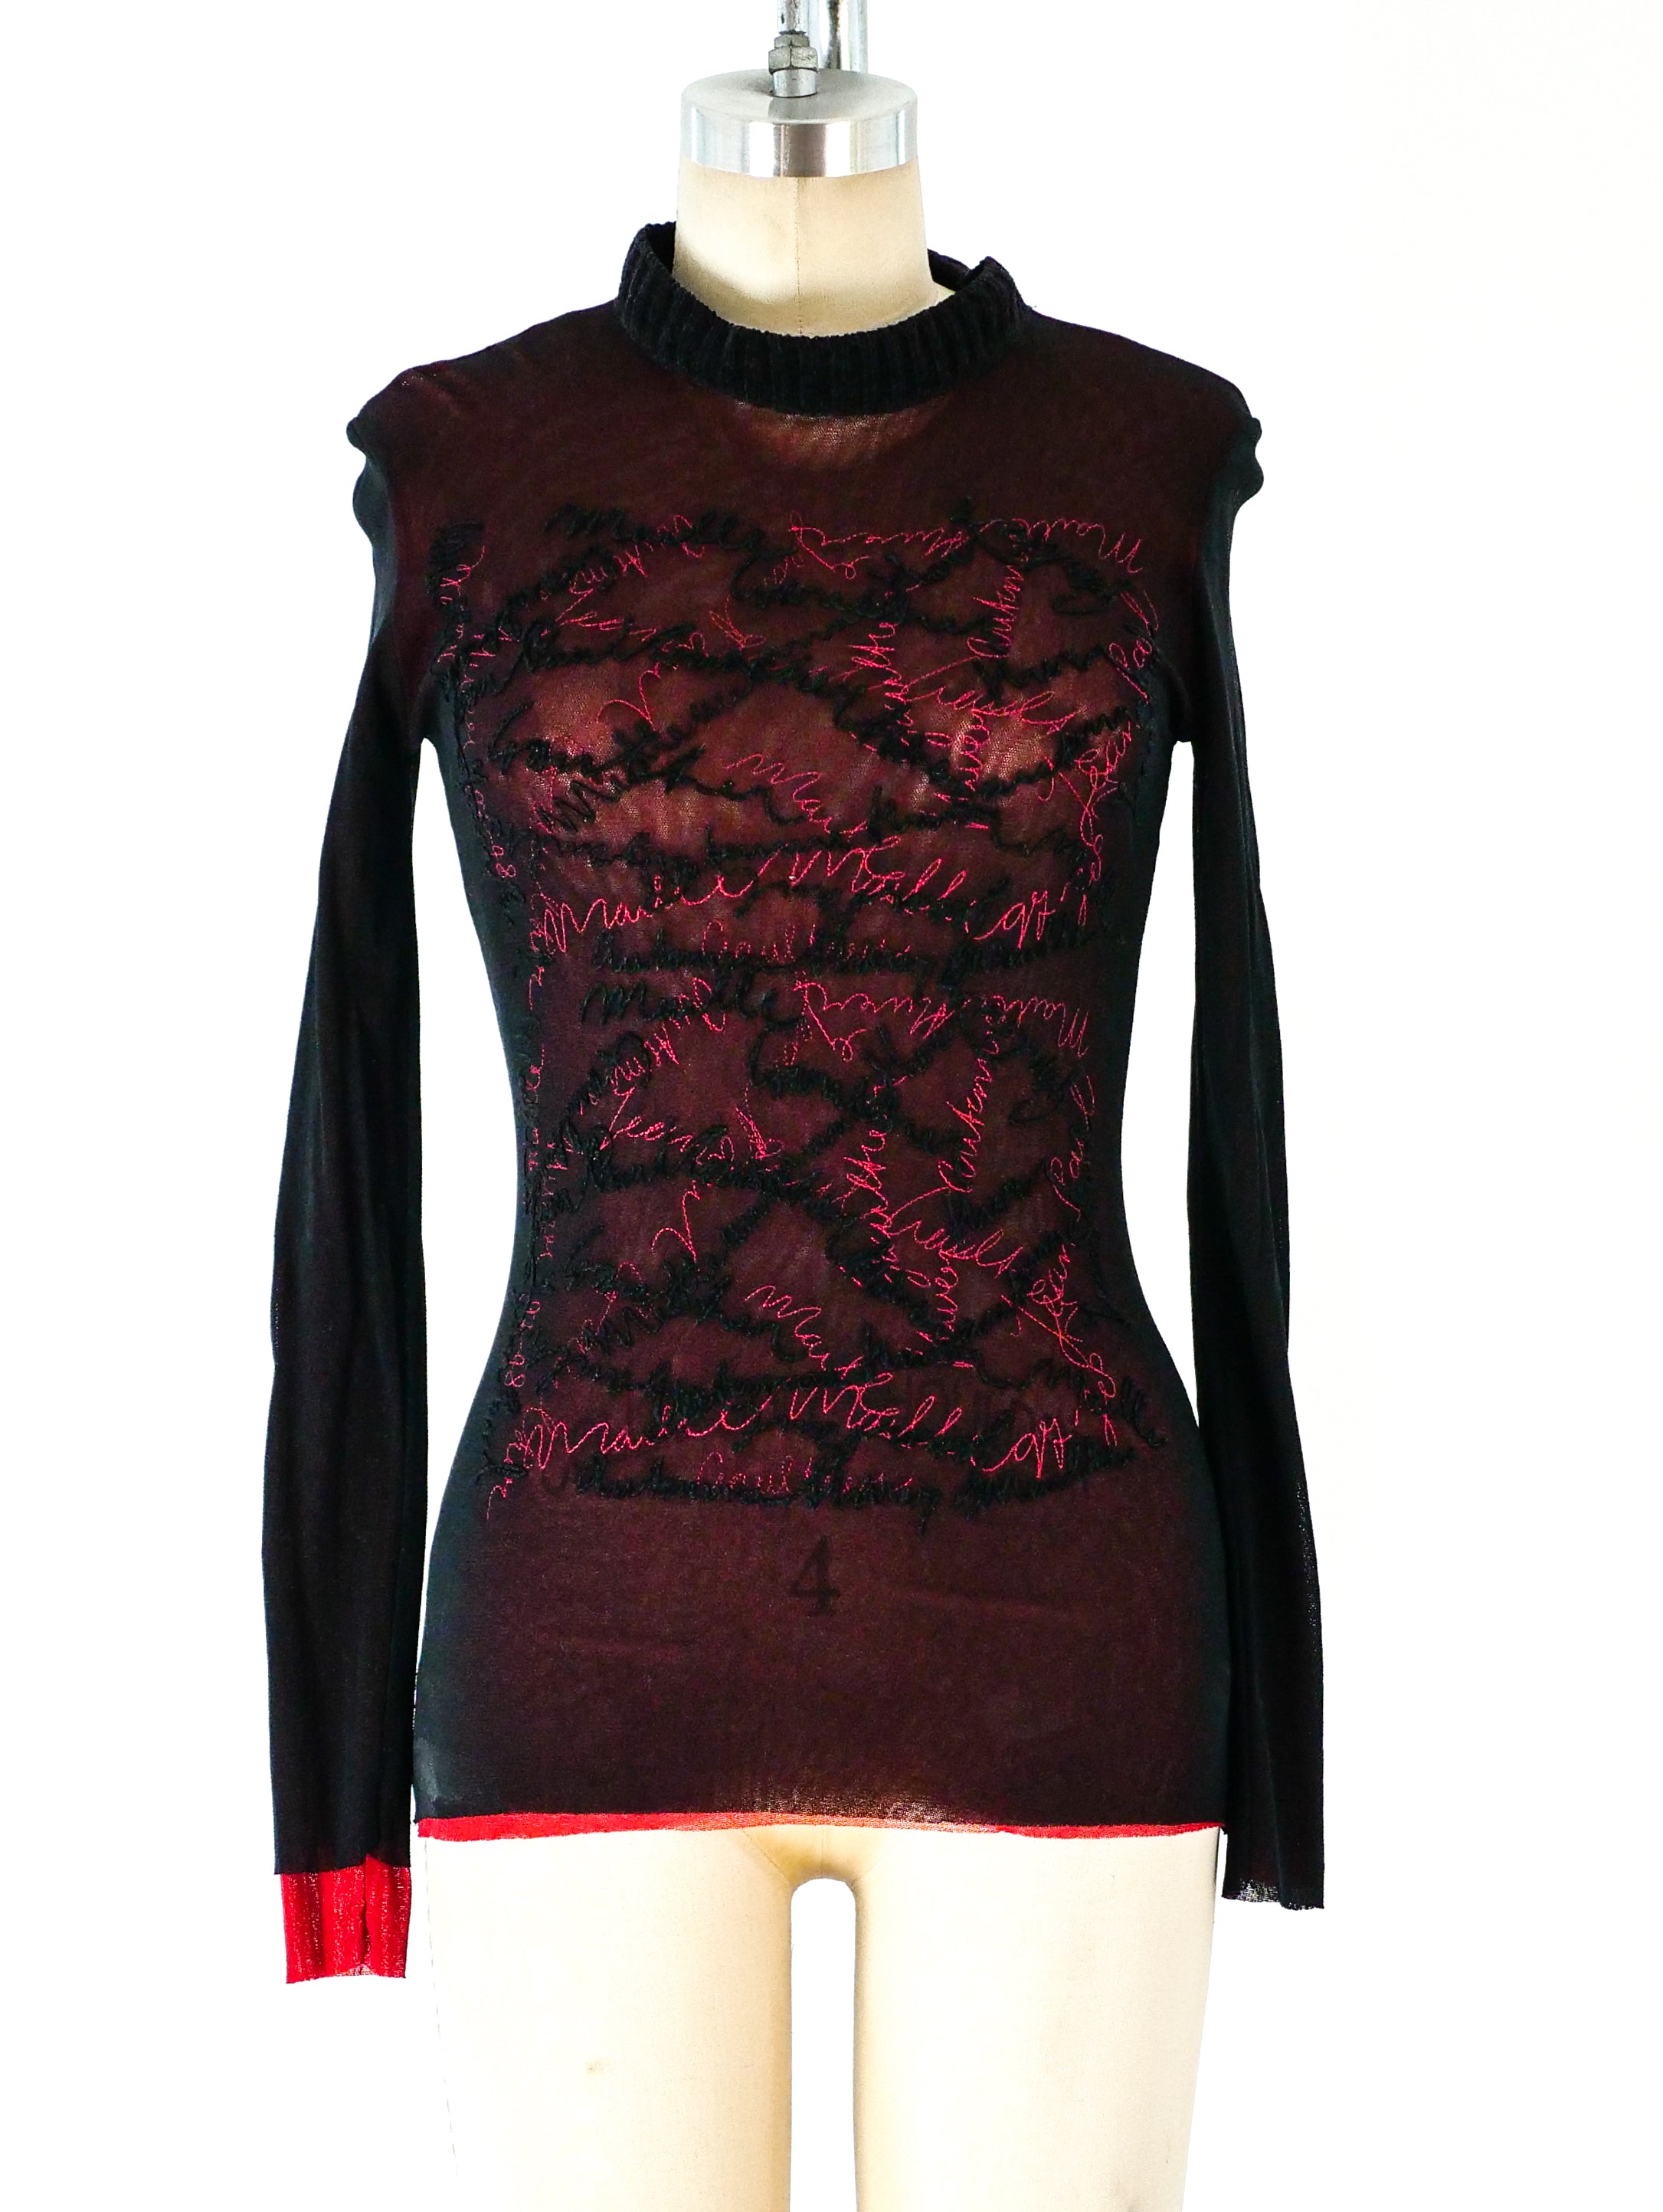 Jean Paul Gaultier Signature Embroidered Mesh Top